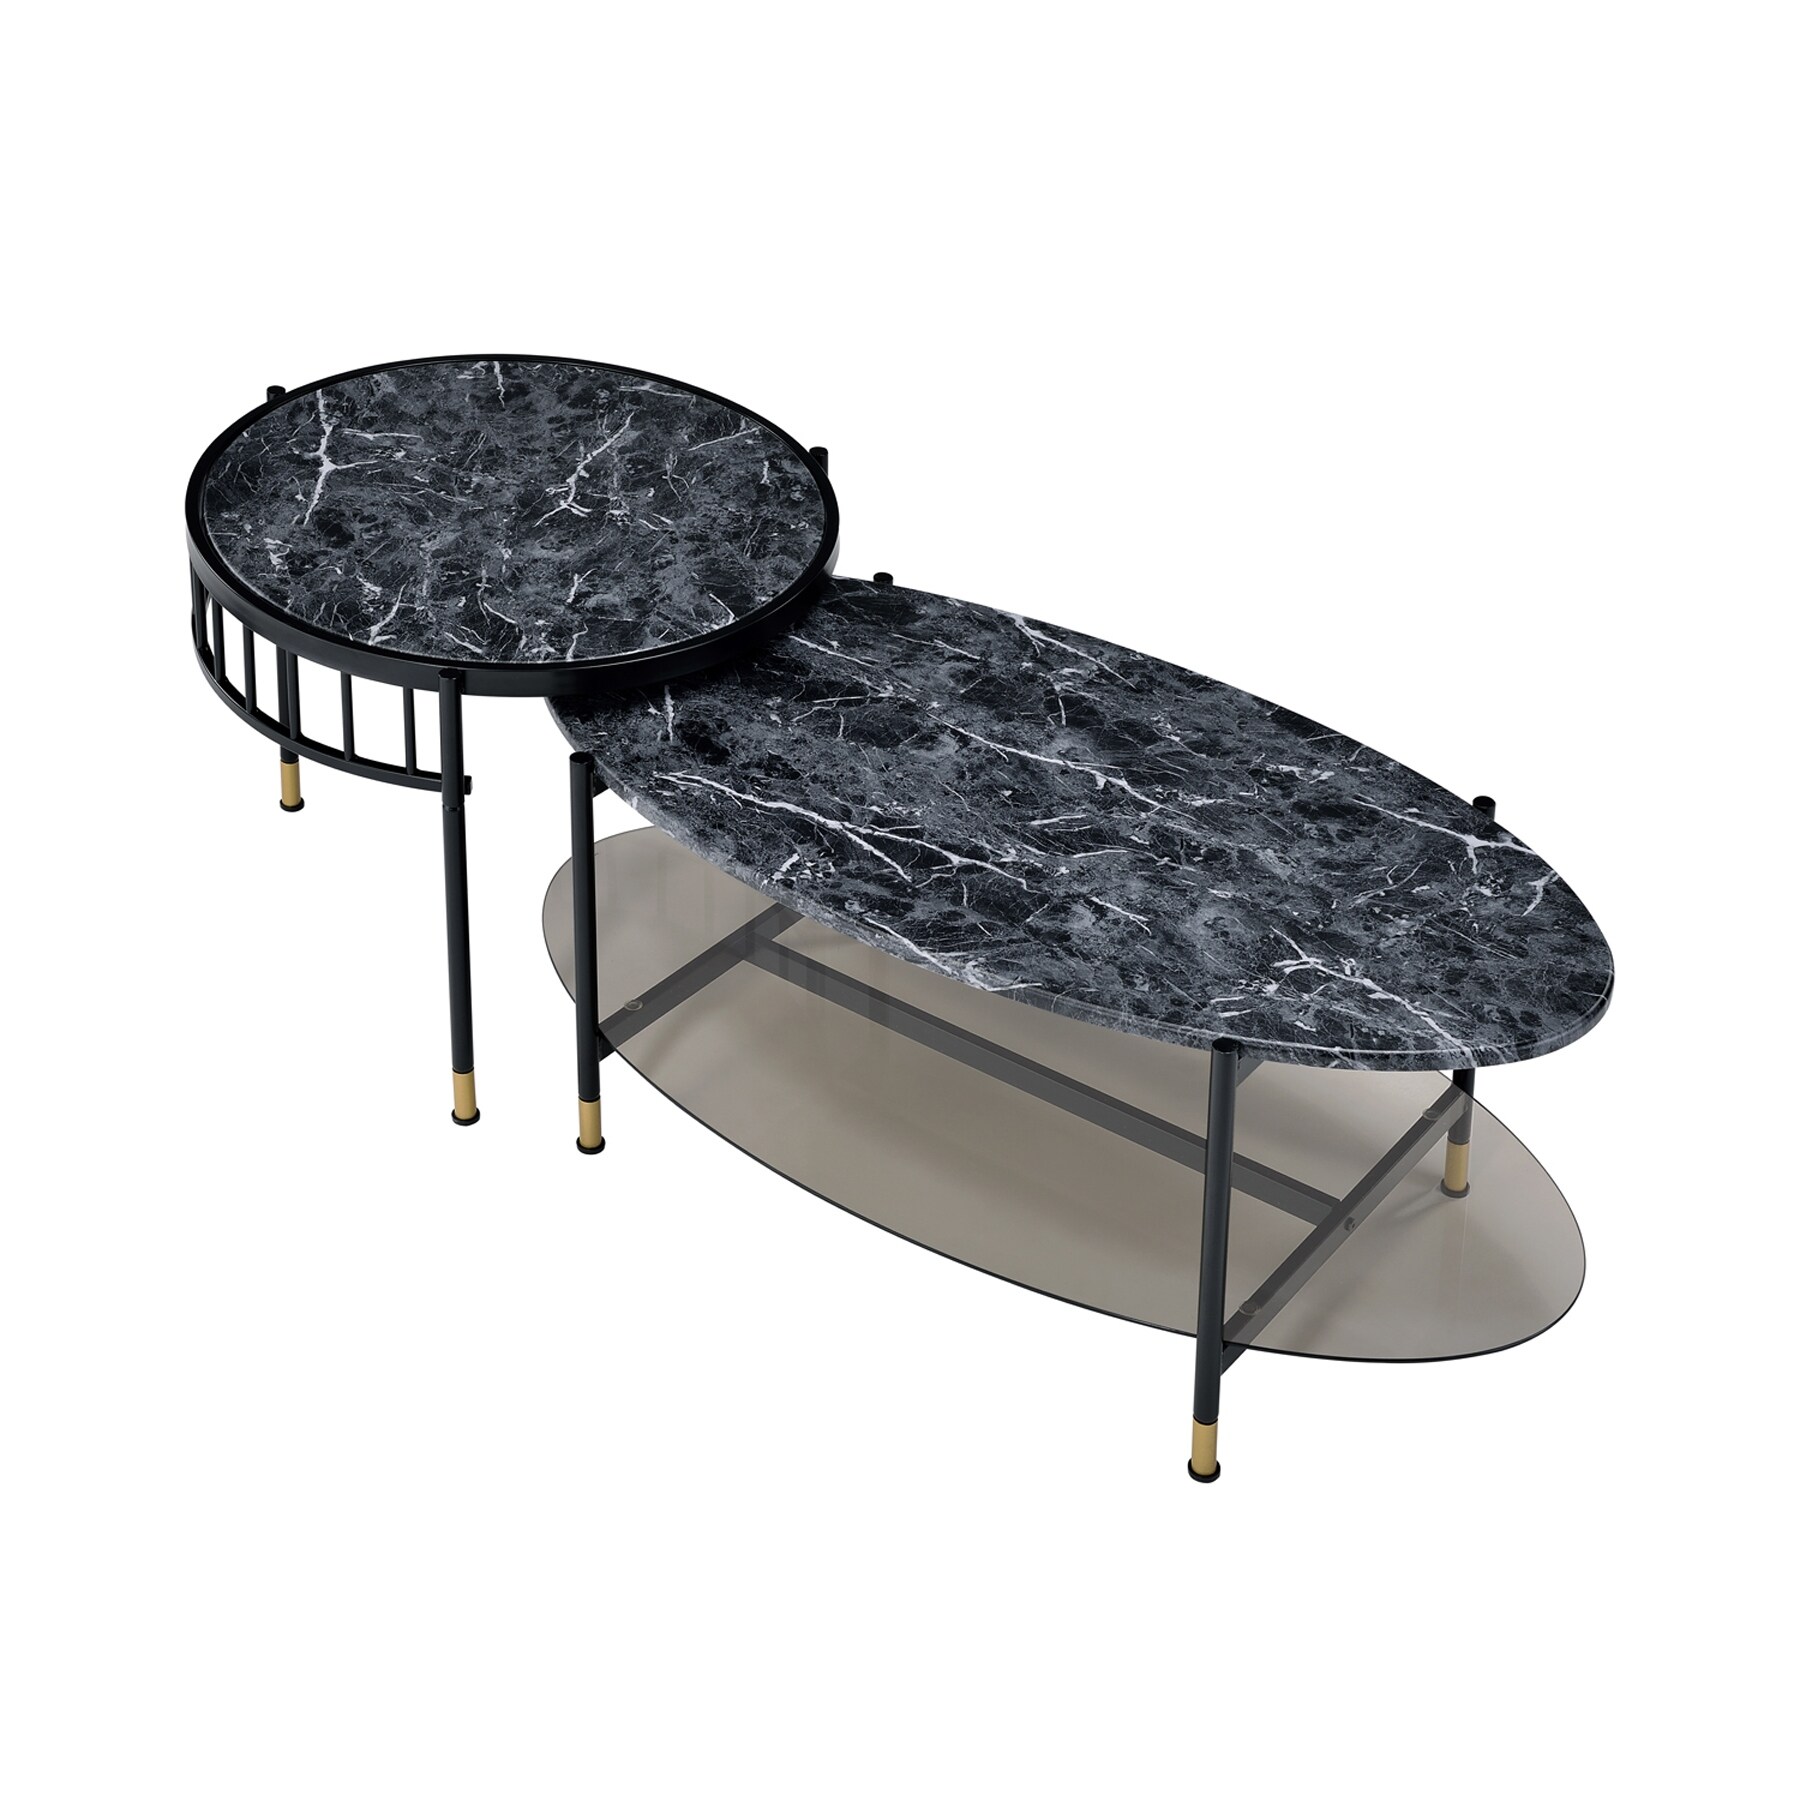 2 Piece Oval Nesting Coffee Table in Black Finish